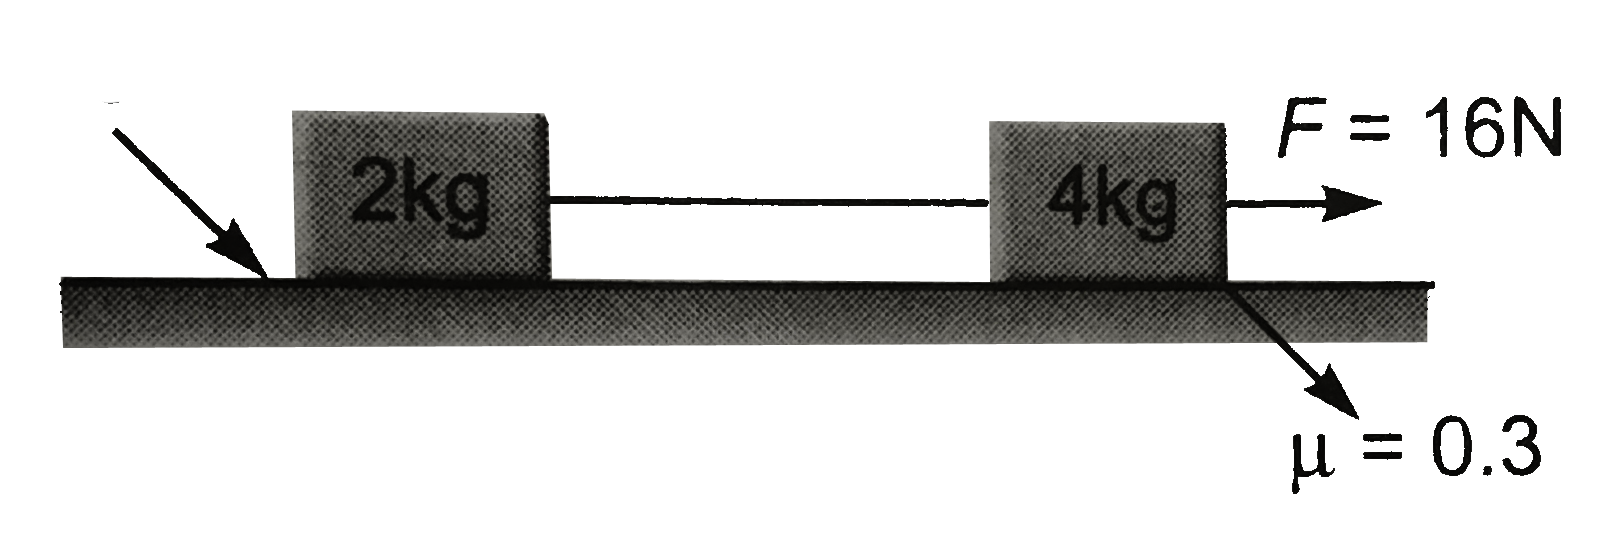 Two blocks of 2 kg and 4 kg are connected by a light string and kept on horizontal surface A force of 16 N is acted on 4 kg block horizontally as shown in figure. Besides ,it is given that coefficient of friction between 4 kg and ground is 0.3 and between 2 kg block and ground is 0.6. Then frictional force between 2 kg block ground is